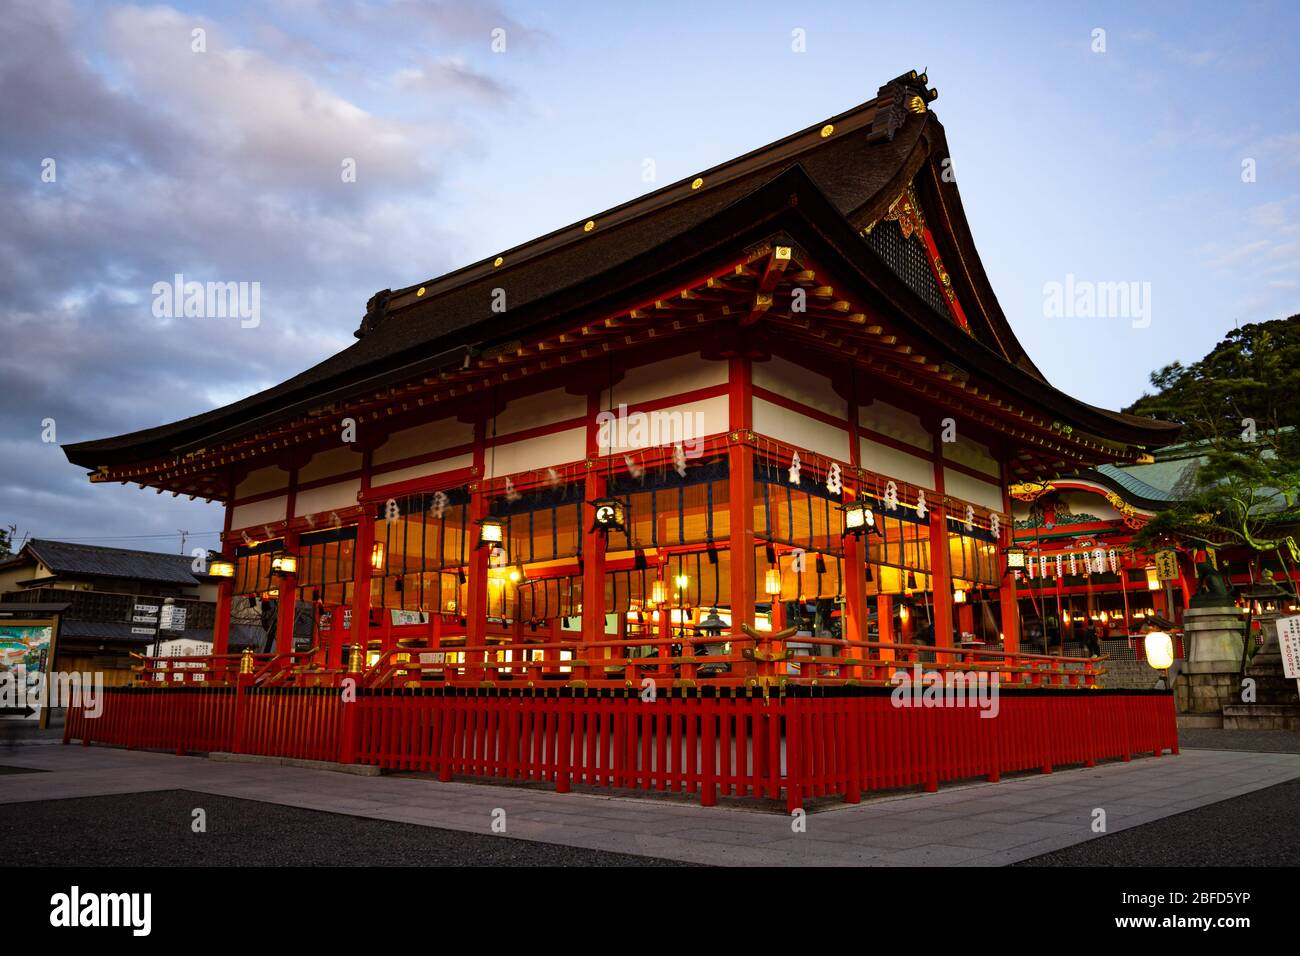 Fushimi Inari-Taisha Shrine is known worldwide as one of the most iconic sights in Kyoto, Japan. More than 1300 years historical building. Stock Photo